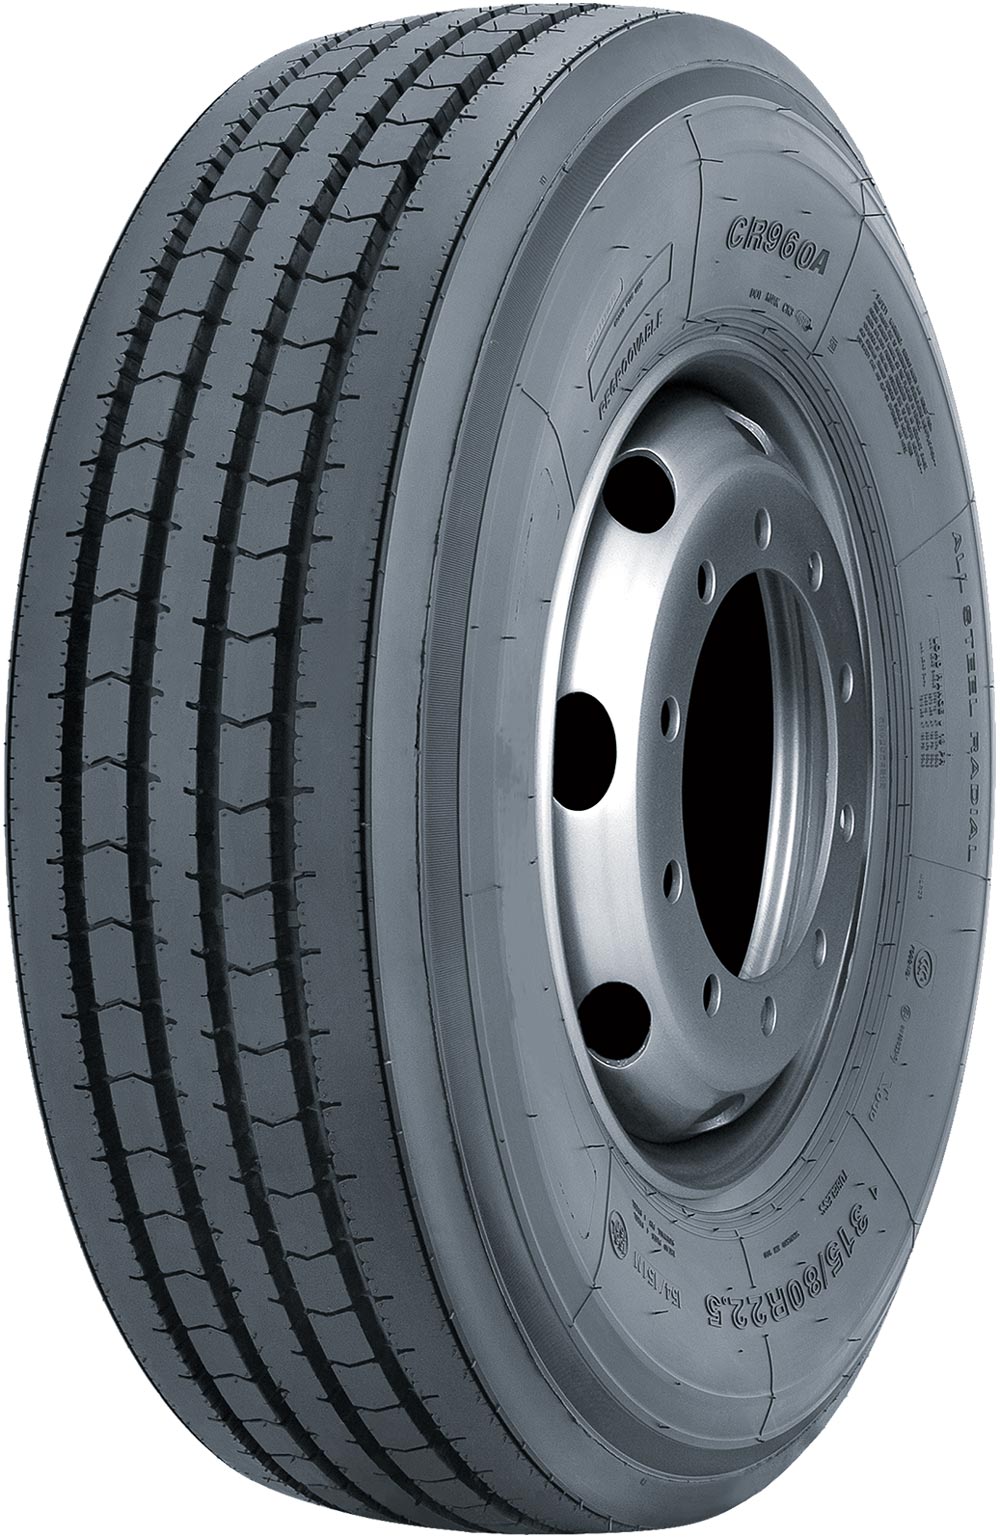 product_type-heavy_tires GOODRIDE CR960A 235/75 R17.5 132M